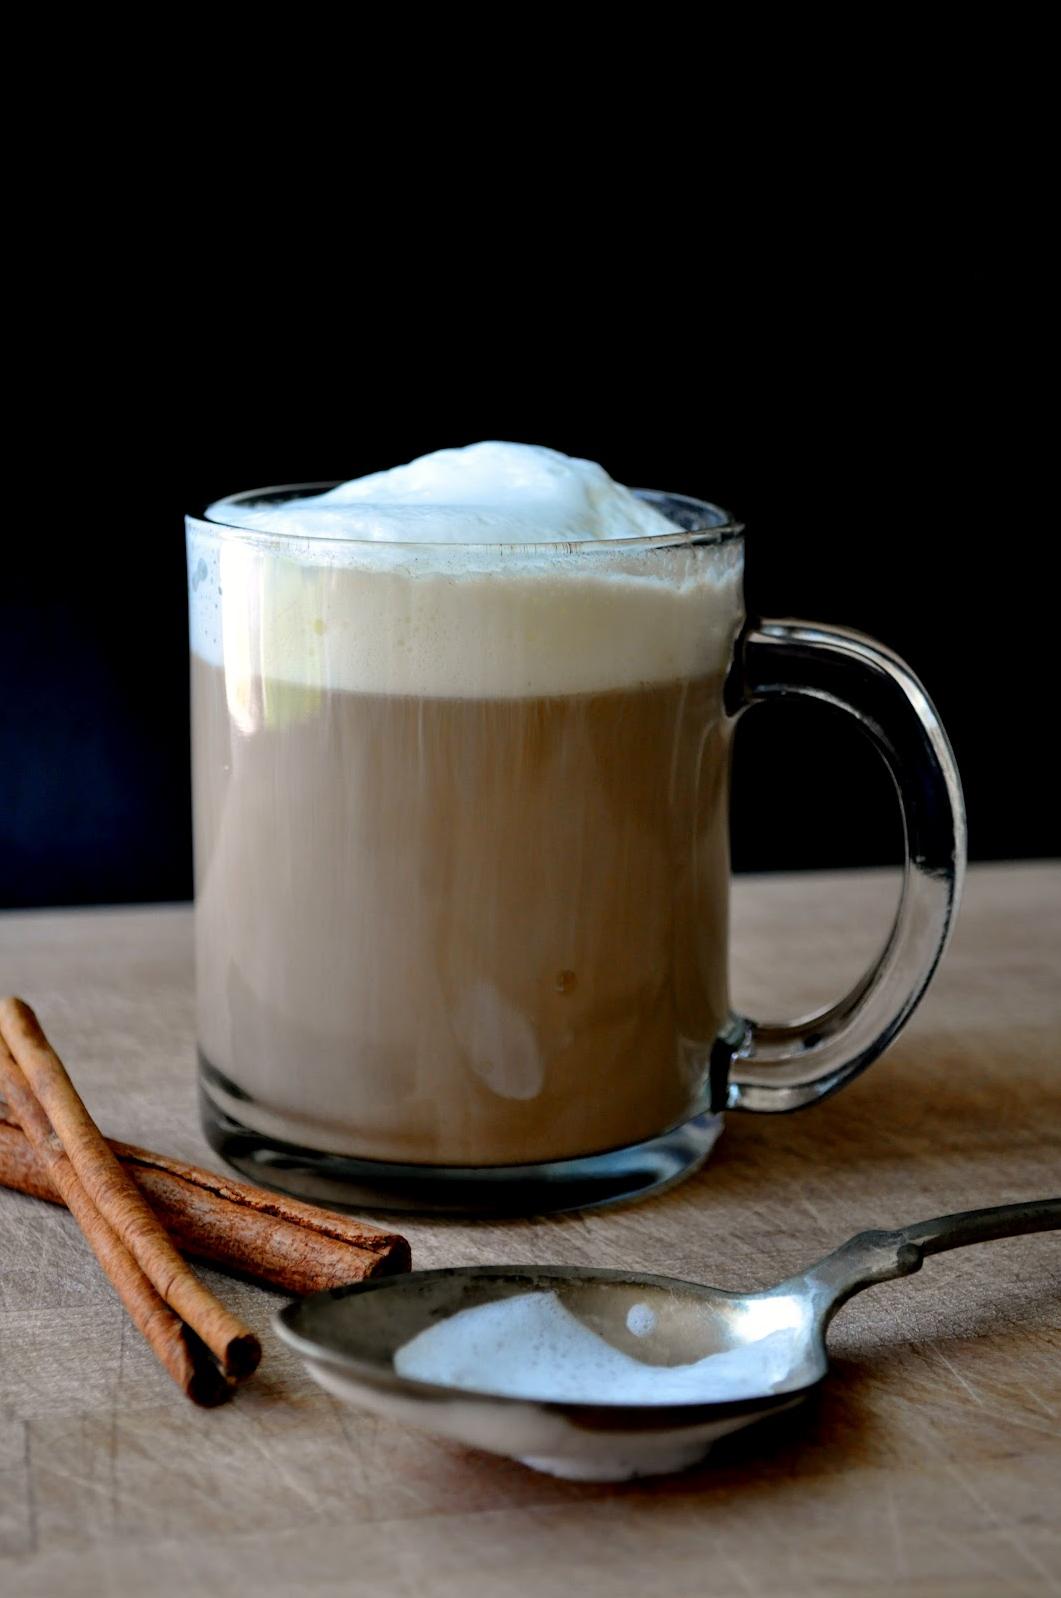  This latte will become your new favorite go-to drink